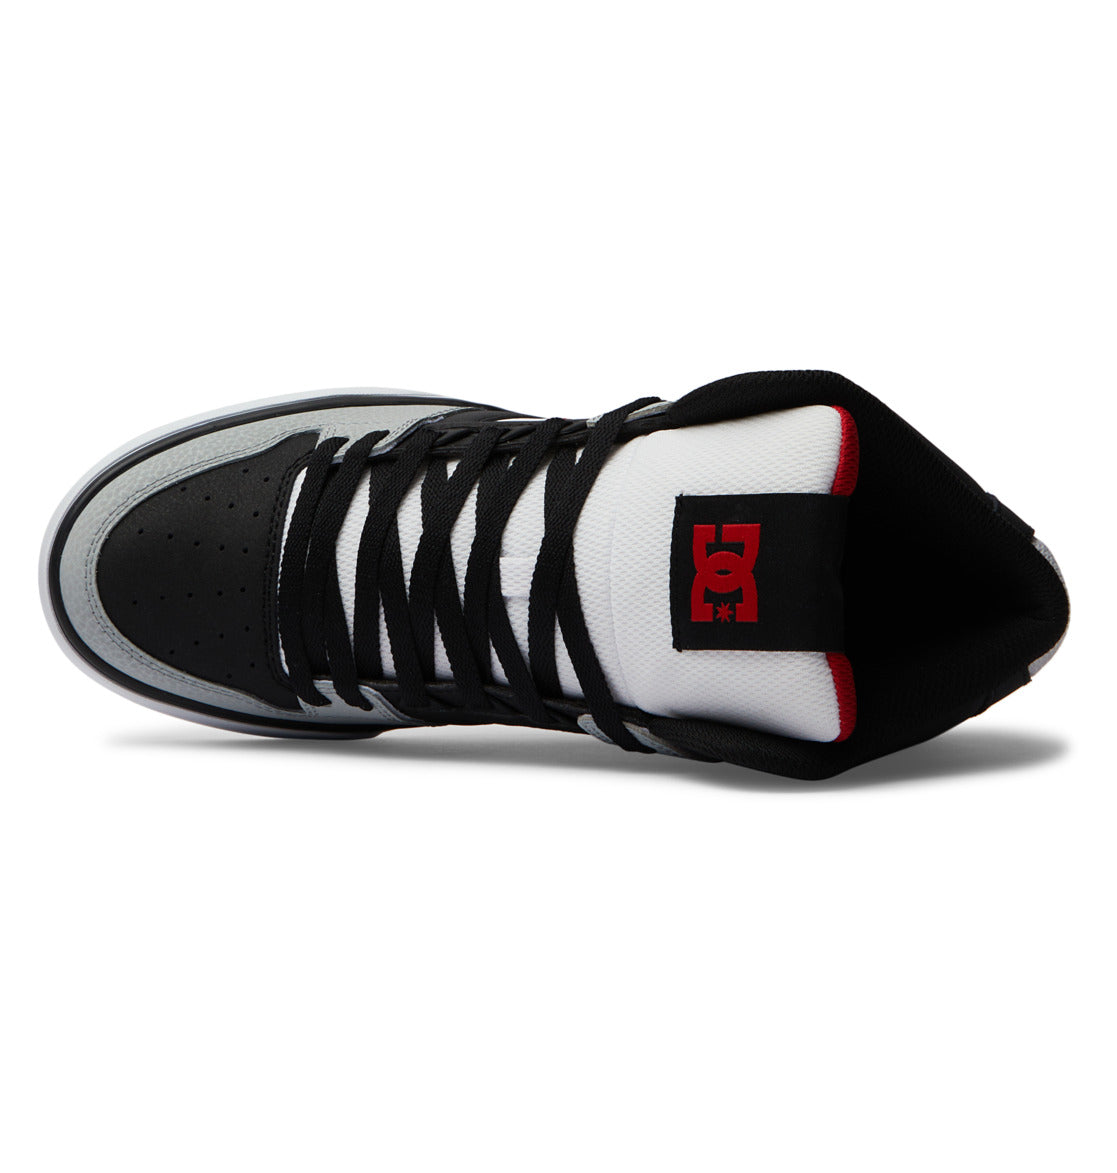 DC SHOES Pure High Top Black/Red/Grey